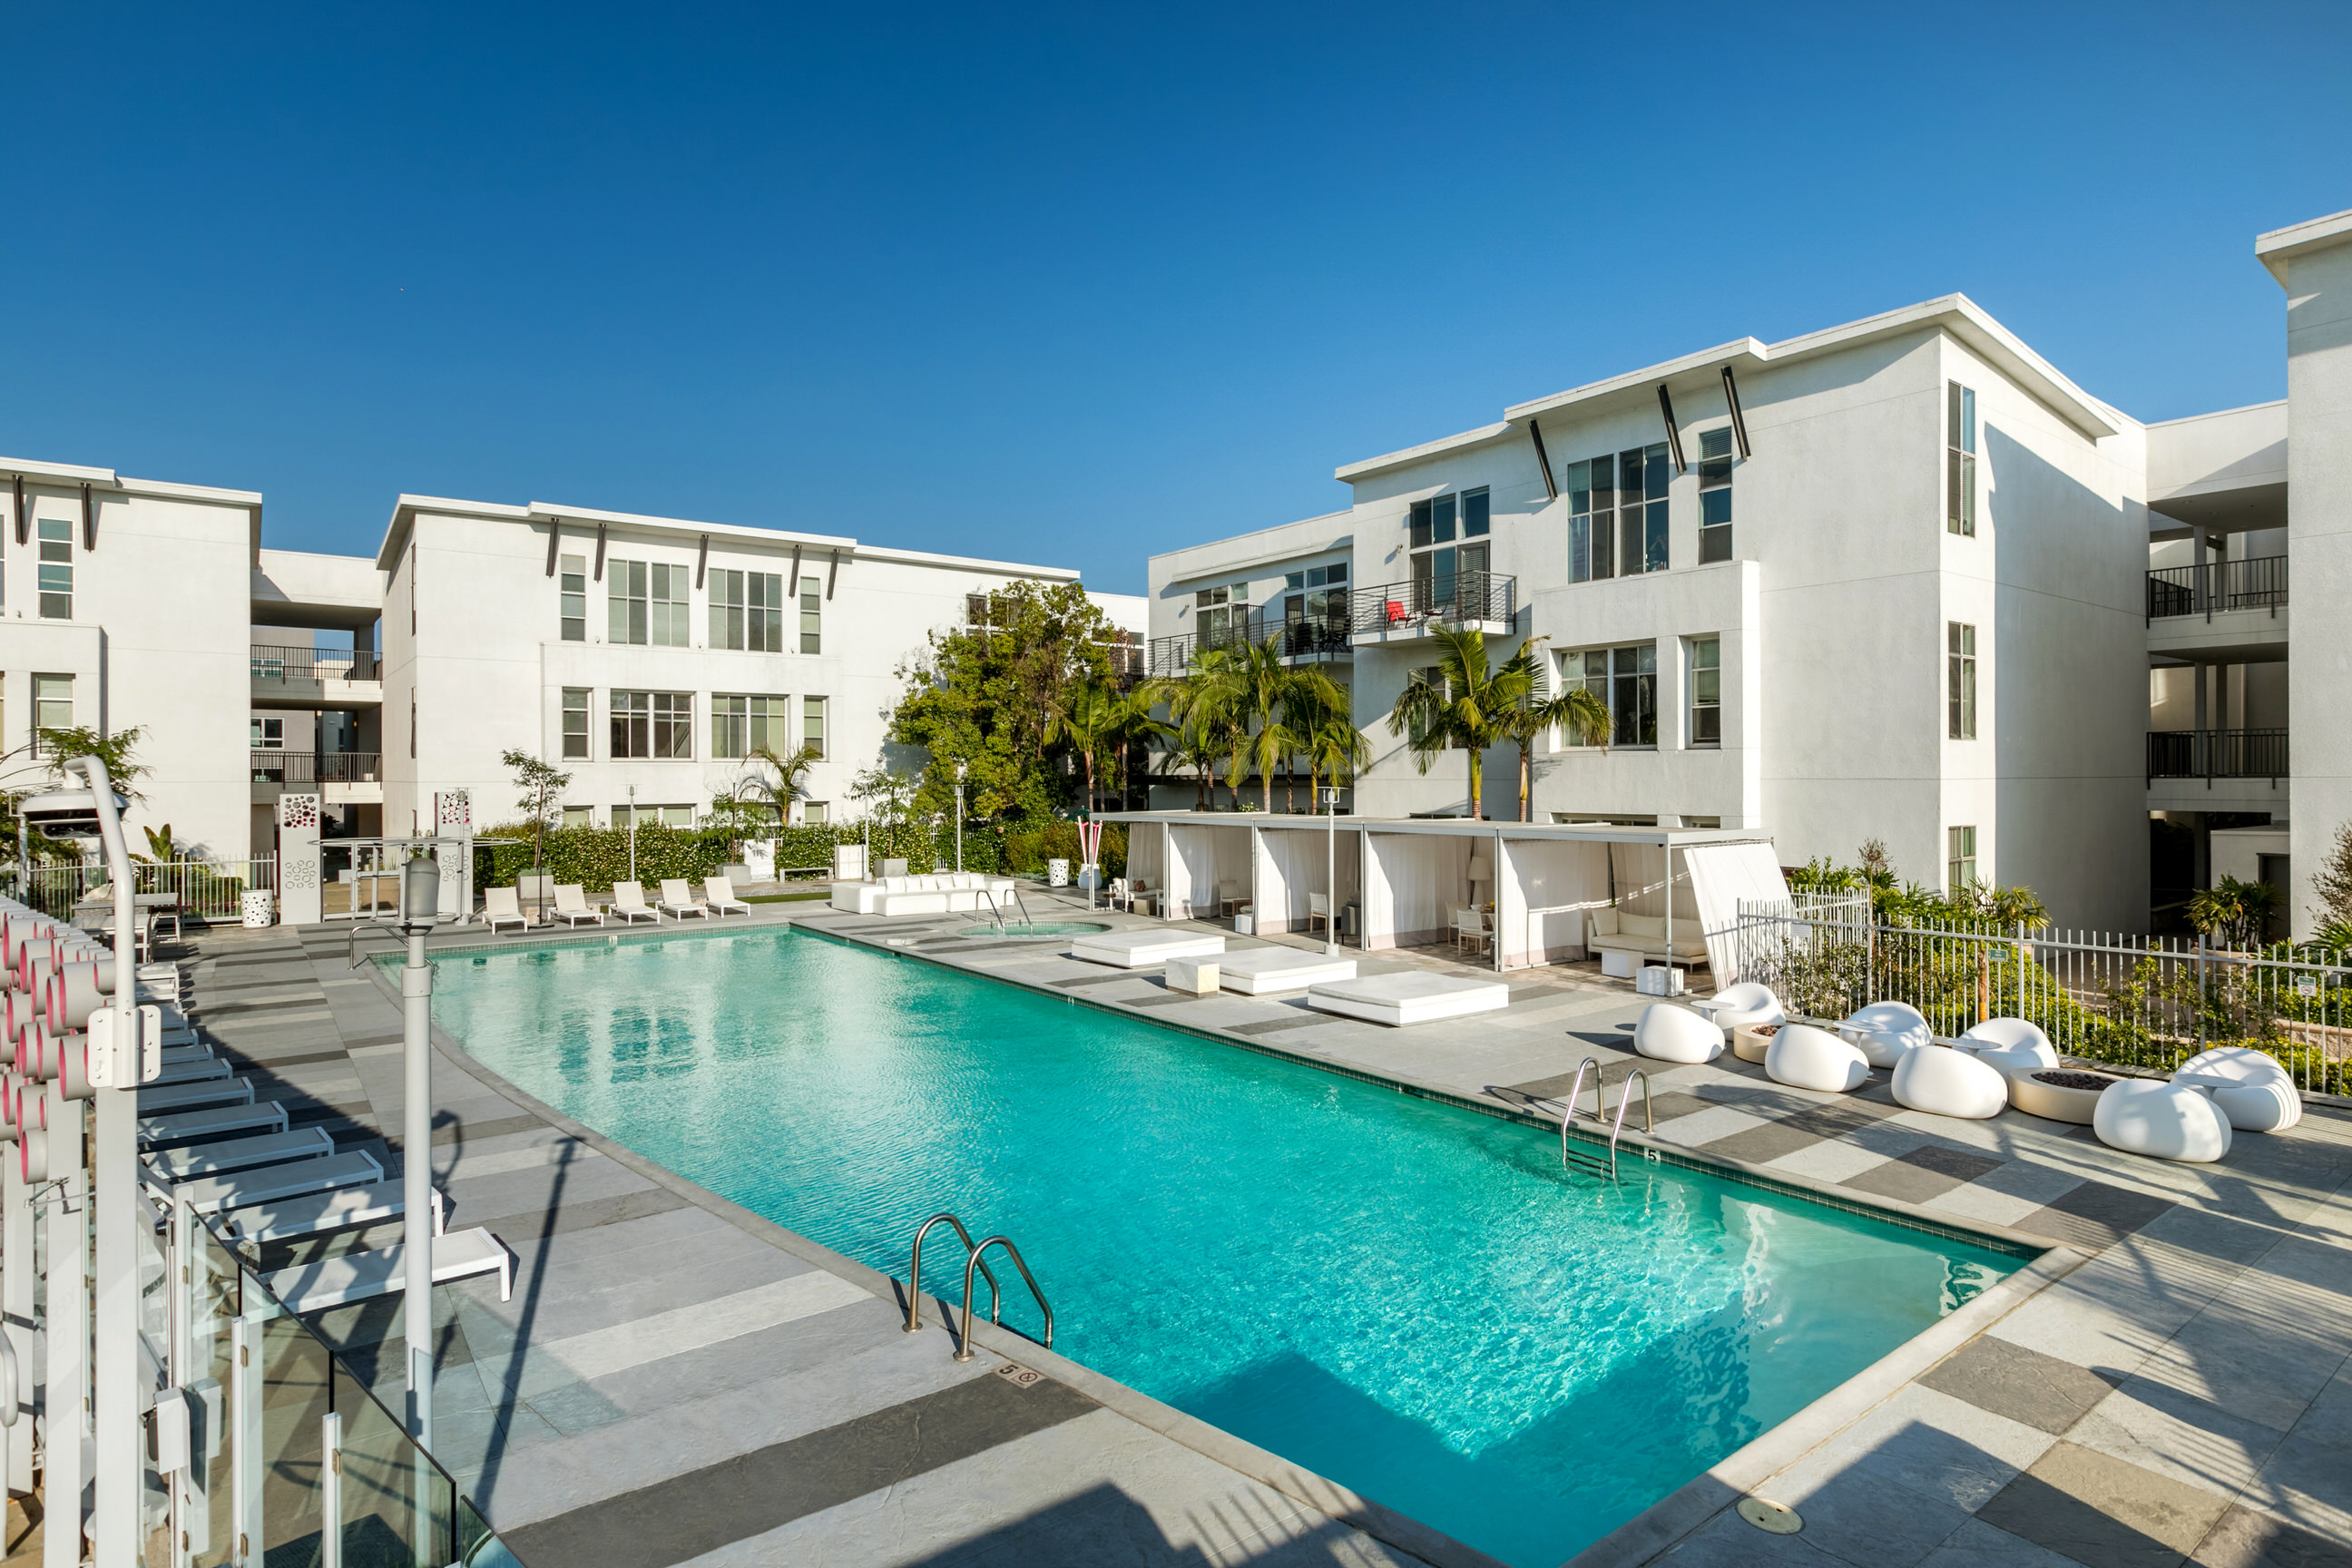 Photo of resort style pool at Lofts at NoHo Commons Apartments in North Hollywood, Los Angeles.